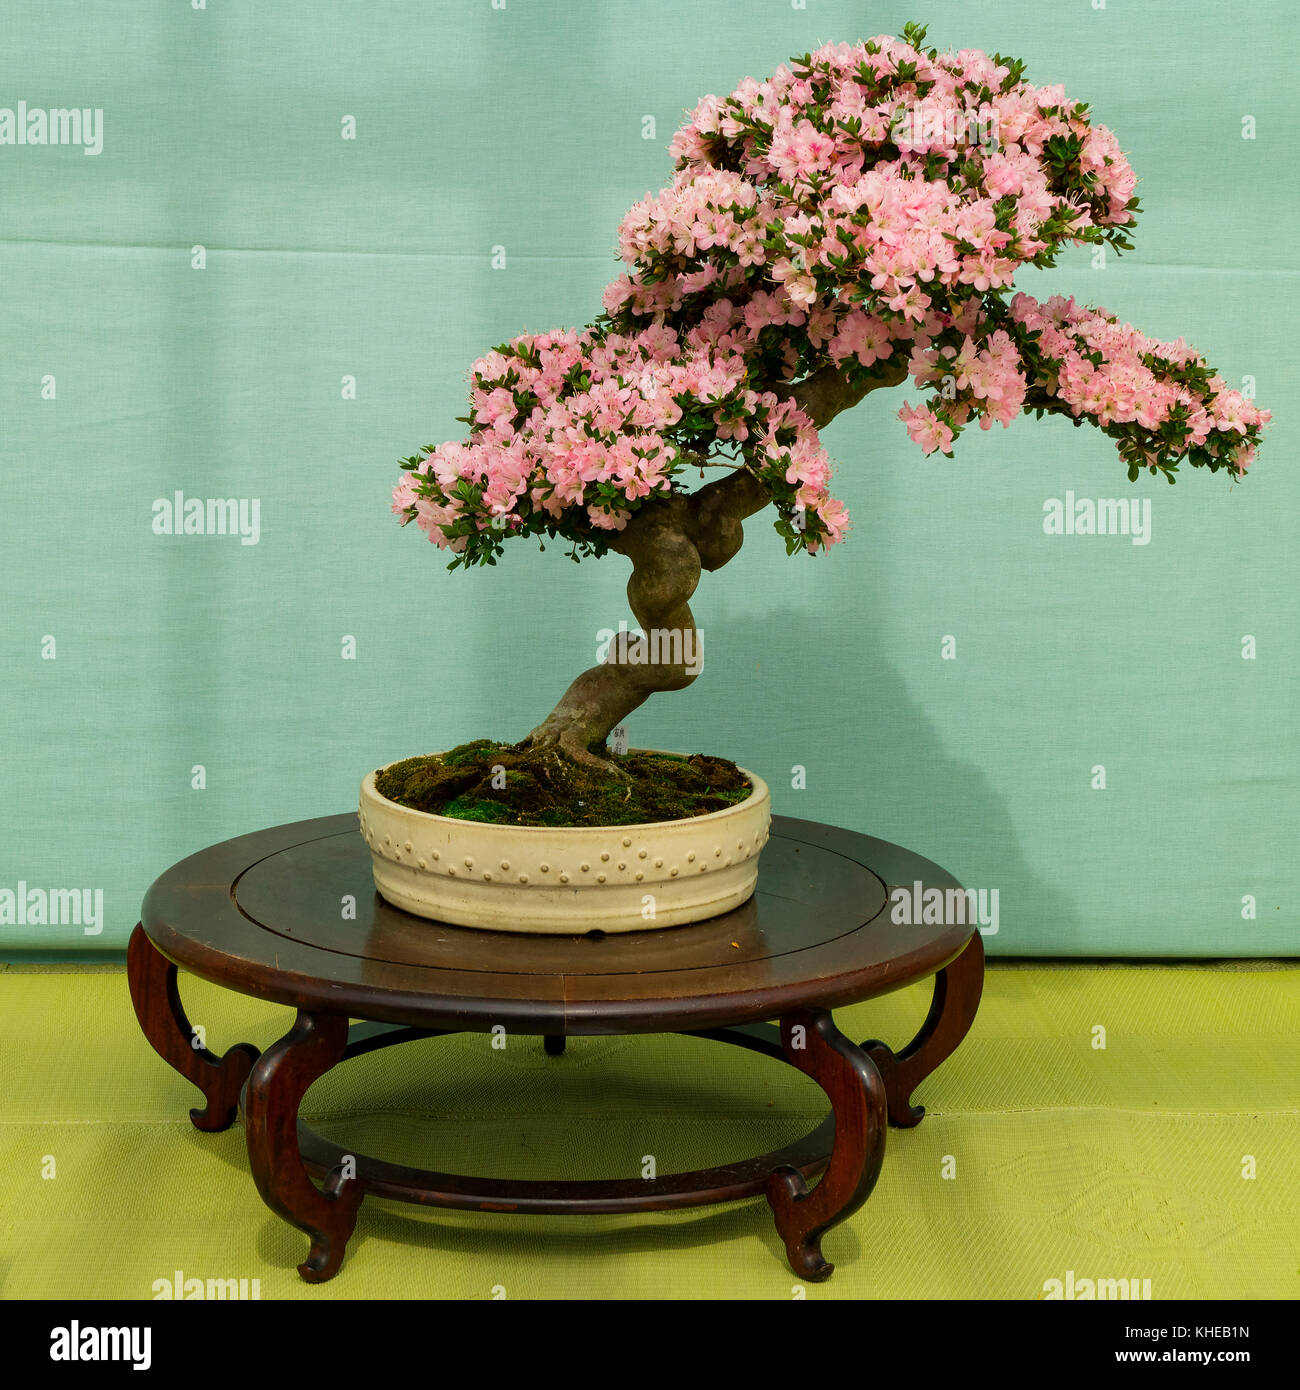 Kyoto, Japan - May 21, 2017: Pink flowering azalea bonsai tree in a pot at an exhibition in the Kyoto botanical garden Stock Photo